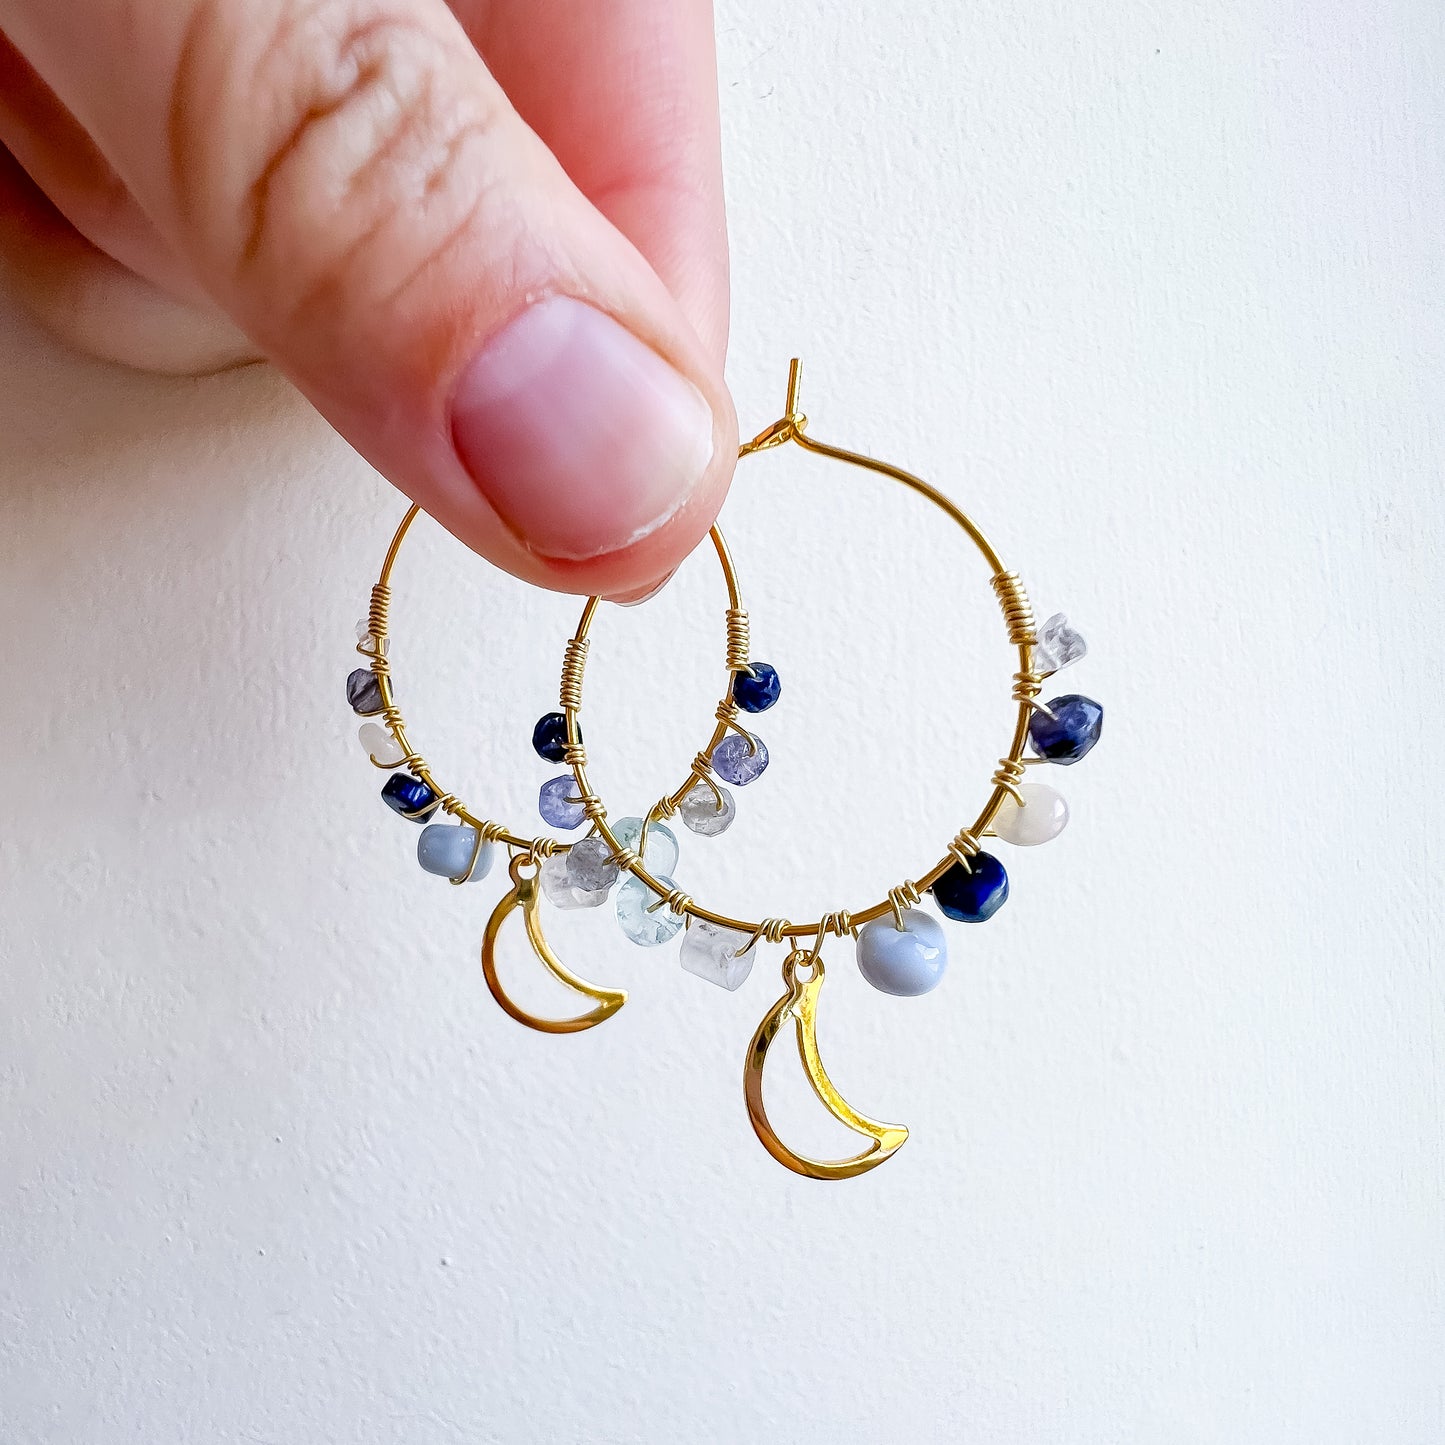 PRE-ORDERS - Gold colour - “Once in a blue moon” earrings